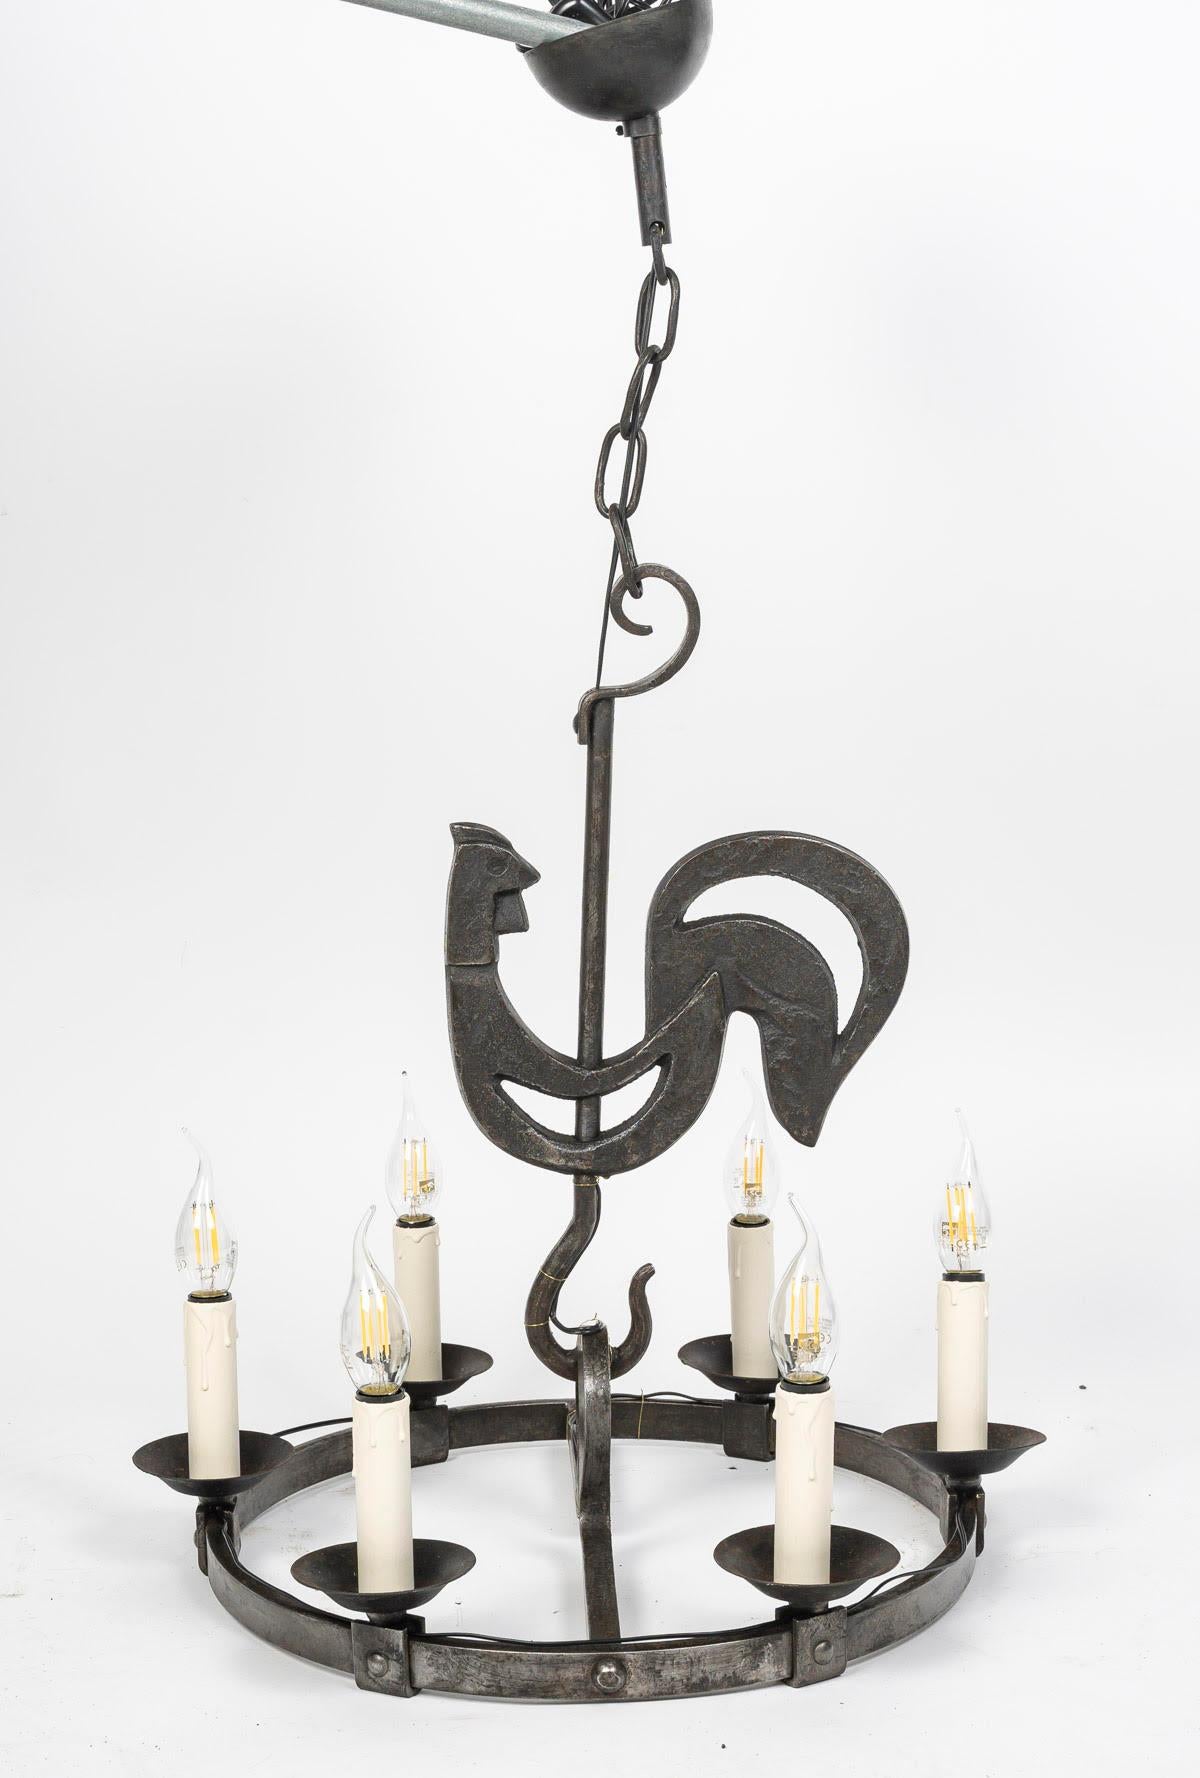 Pair of 1950s-1960s wrought iron chandeliers by Jean Touret, Marolles workshop.

Pair of wrought iron chandeliers by Jean Touret, Marolles workshop, 6 lights each, circa 1950-1960.
h: 83cm, d: 50cm